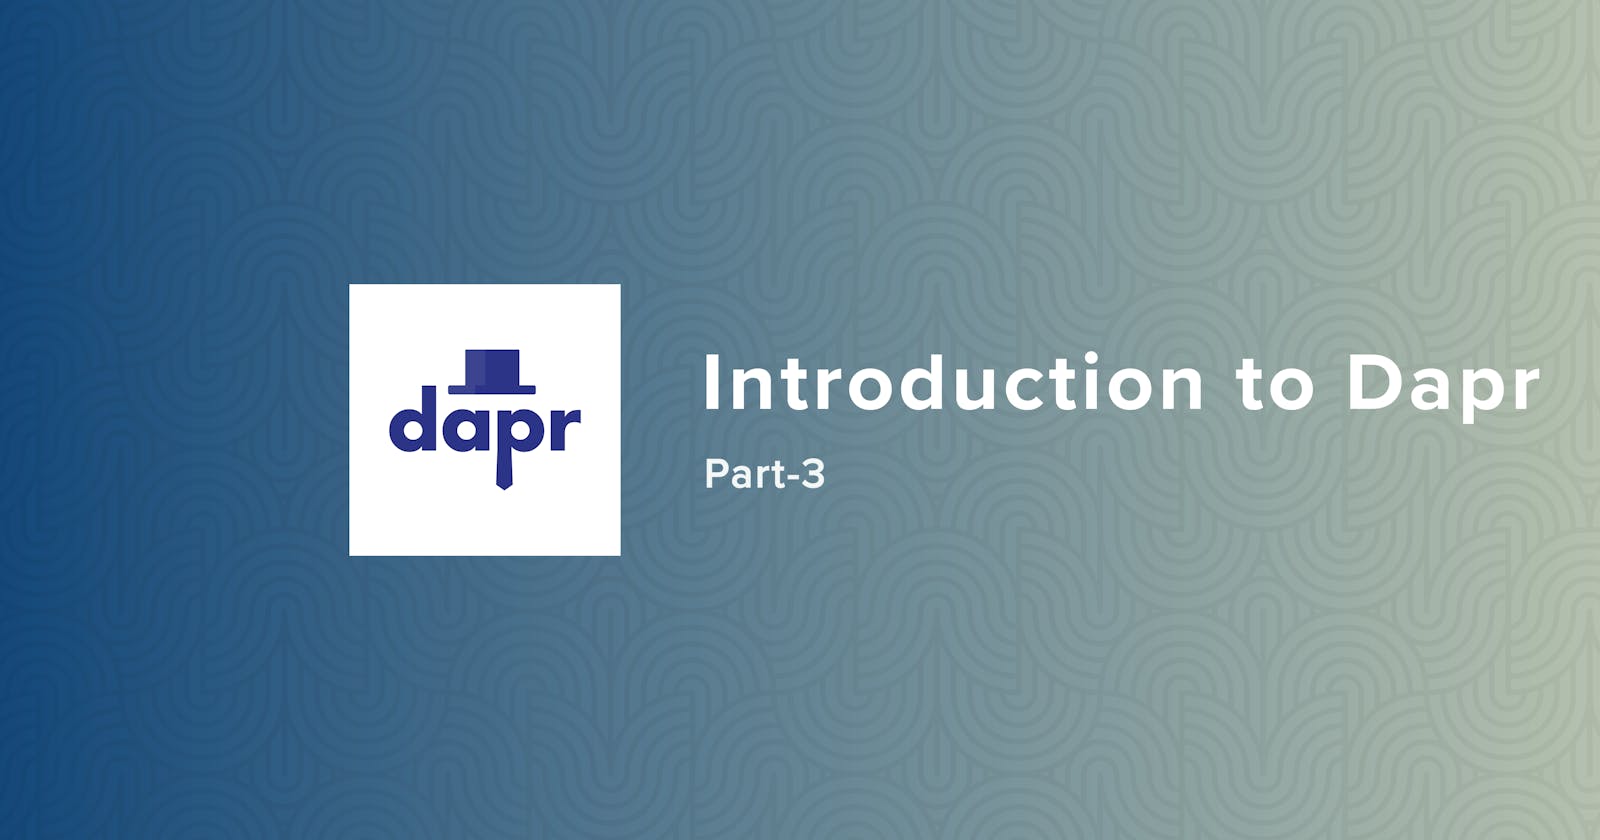 Introduction to Dapr: Part-3